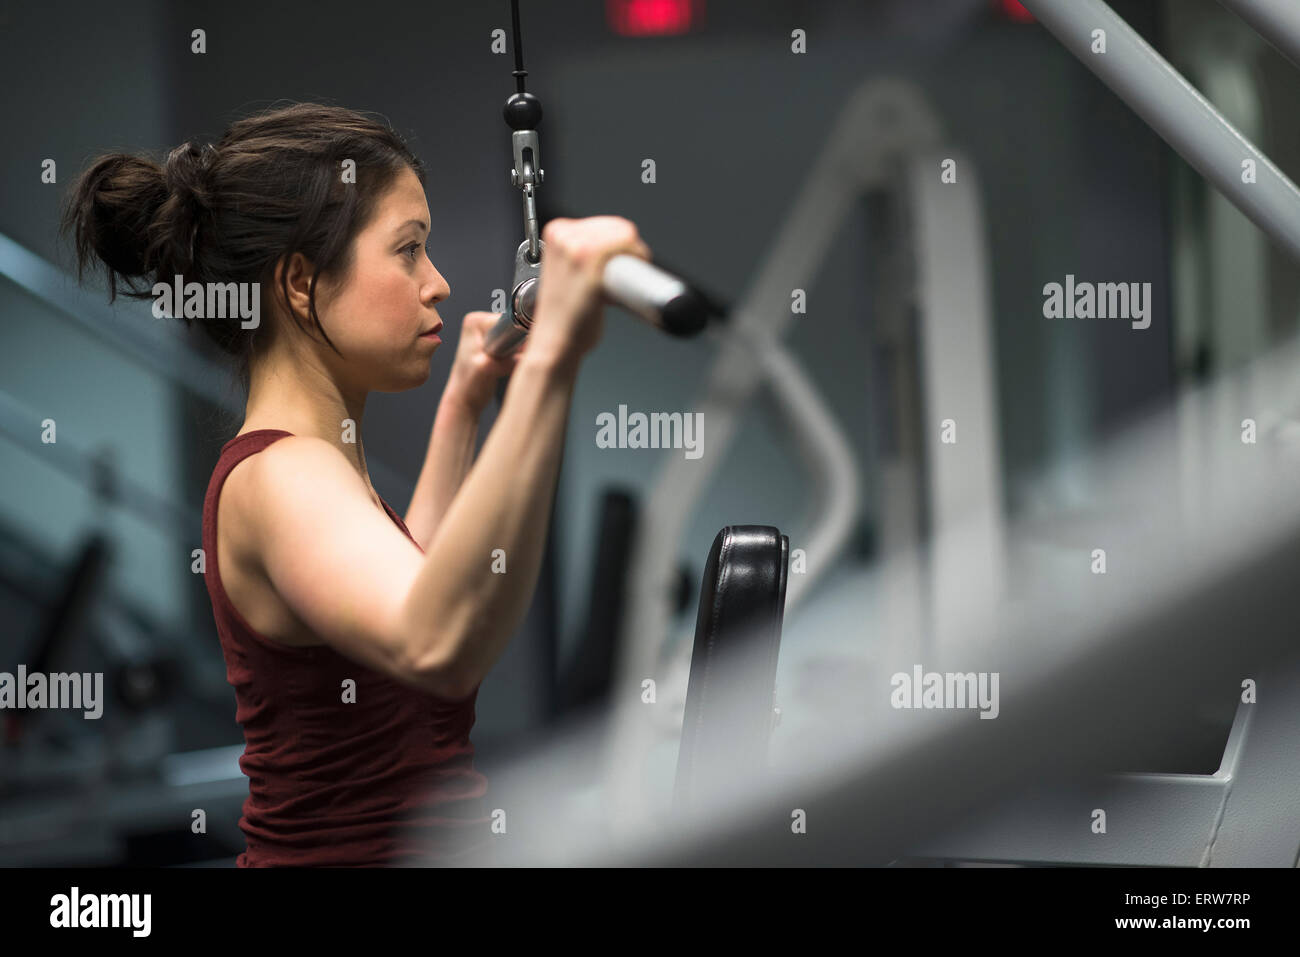 Mixed race woman using exercise machine in gym Stock Photo